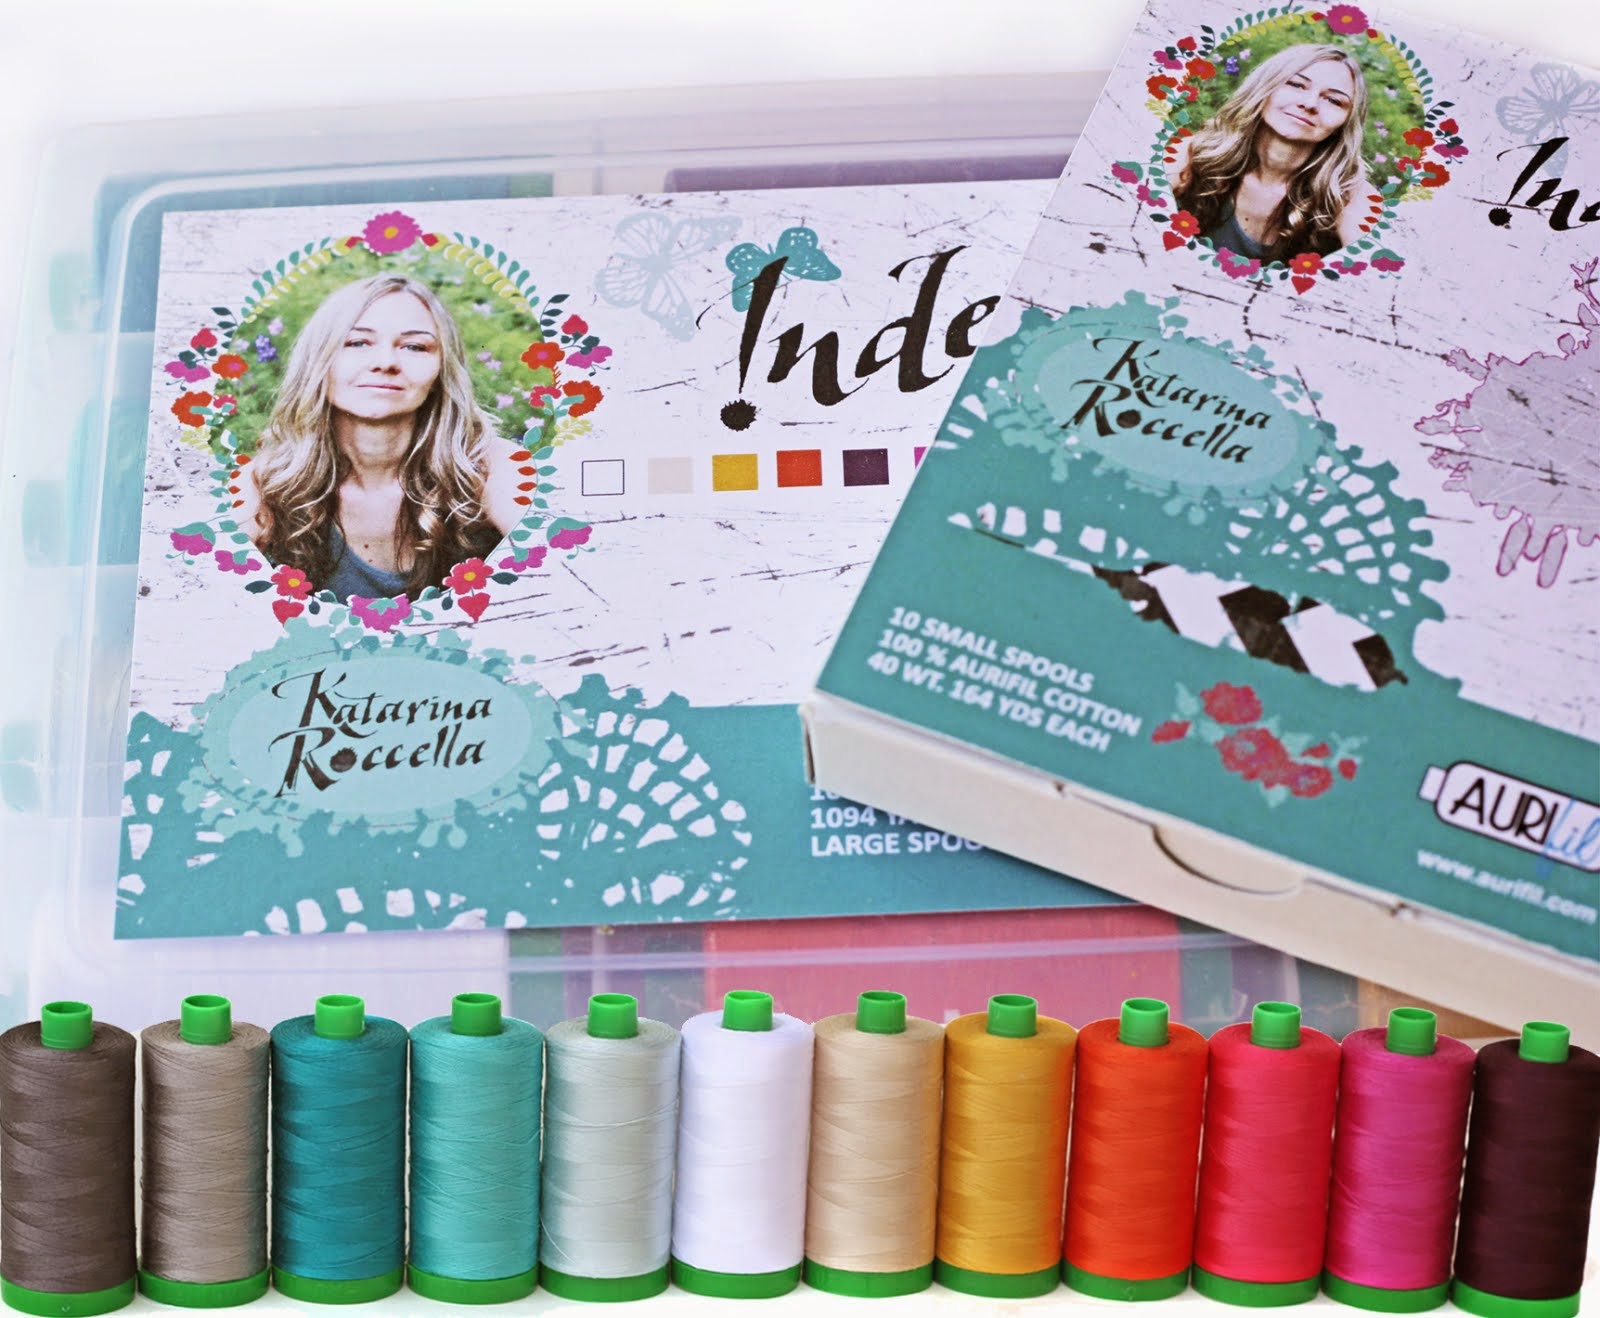 Aurifil thread collection "Indelible"